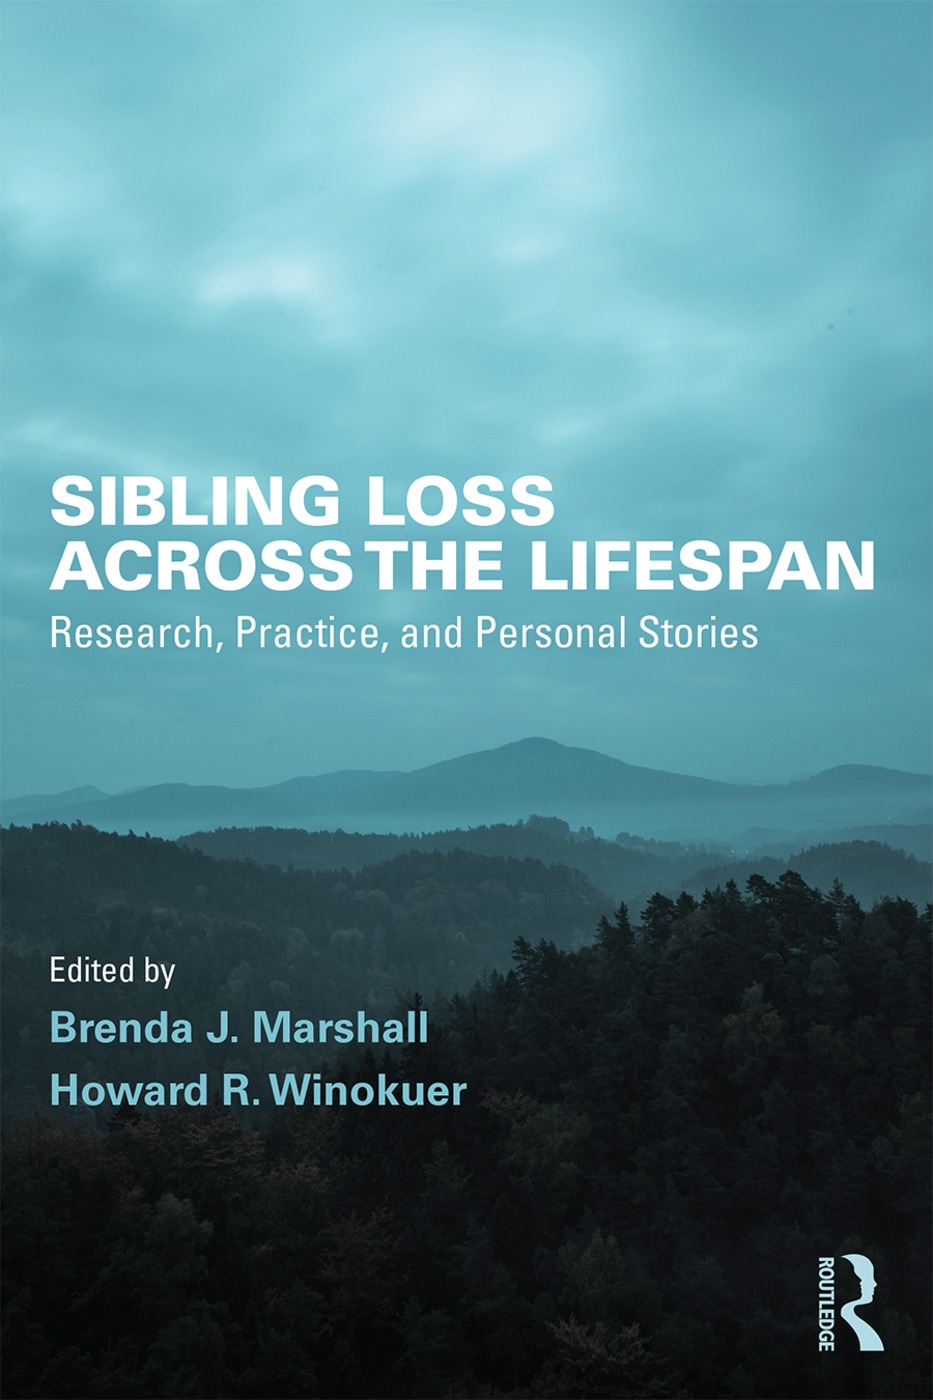 Sibling Loss Across the Lifespan: Research, Practice, and Personal Stories